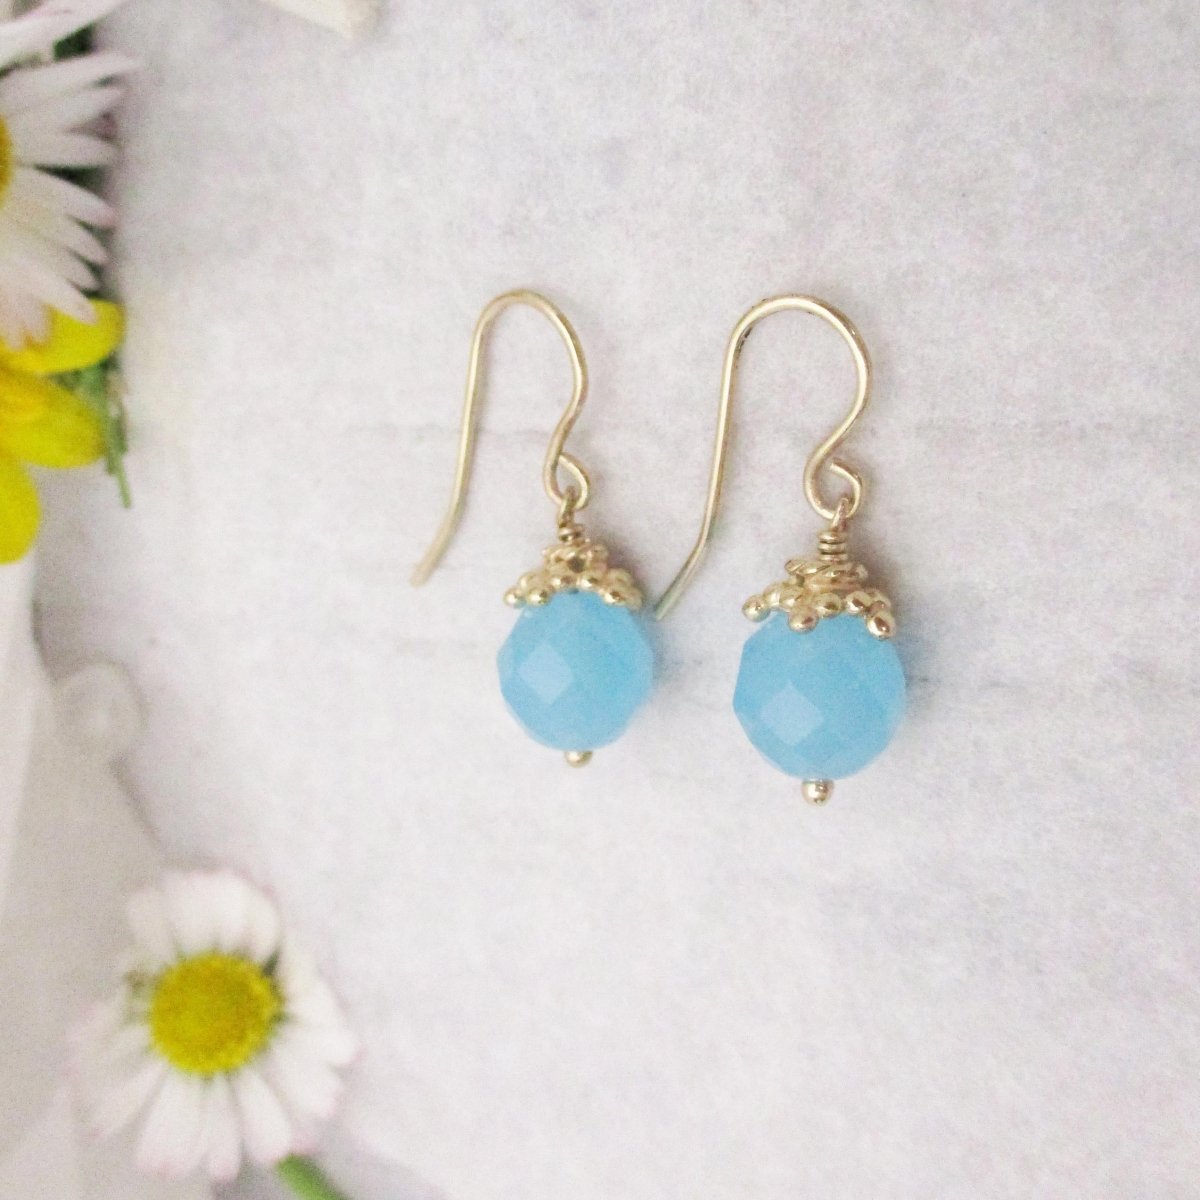 Turquoise Quartz Star Crowned Hook Earrings Choose Solid 14k Gold Or Silver - Luxe Design Jewellery